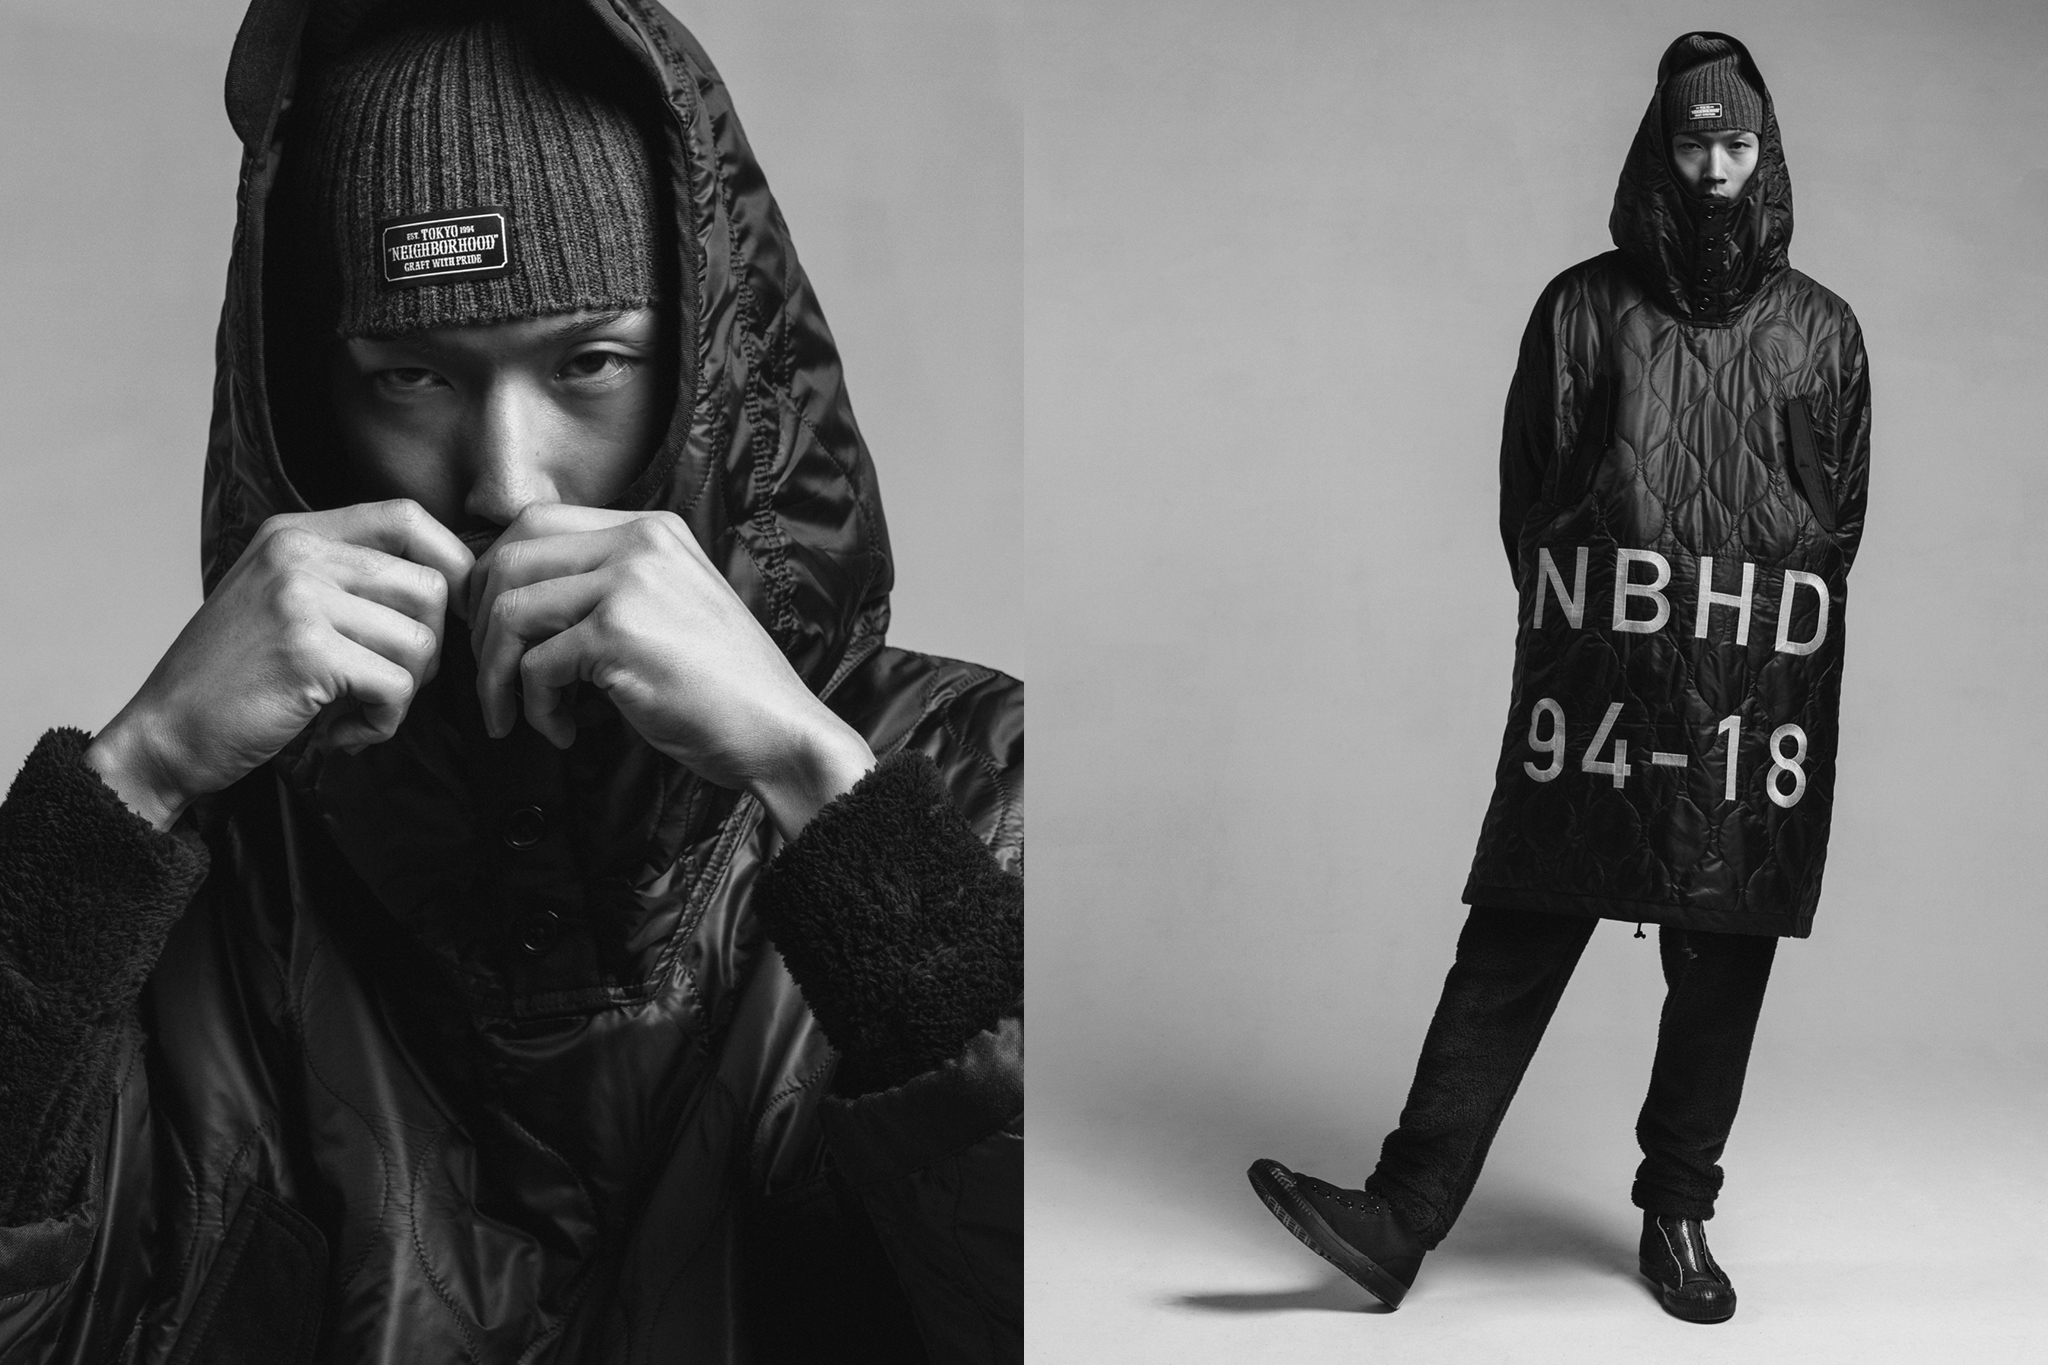 WTAPS and NEIGHBORHOOD is on display in HAVEN's latest FW '18 